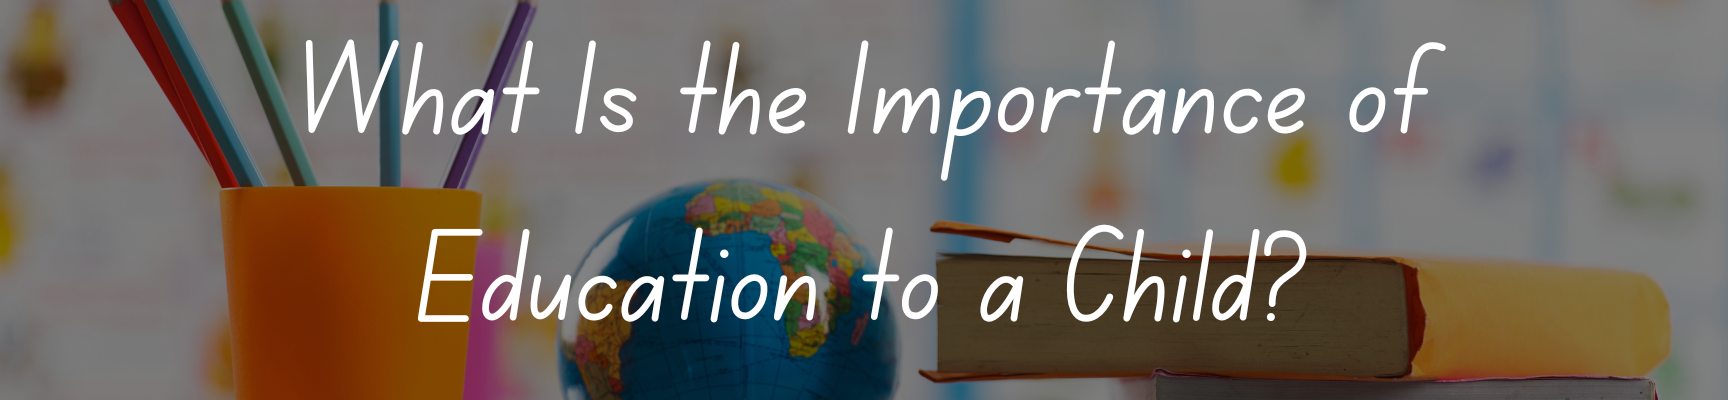 What Is the Importance of Education to a Child?